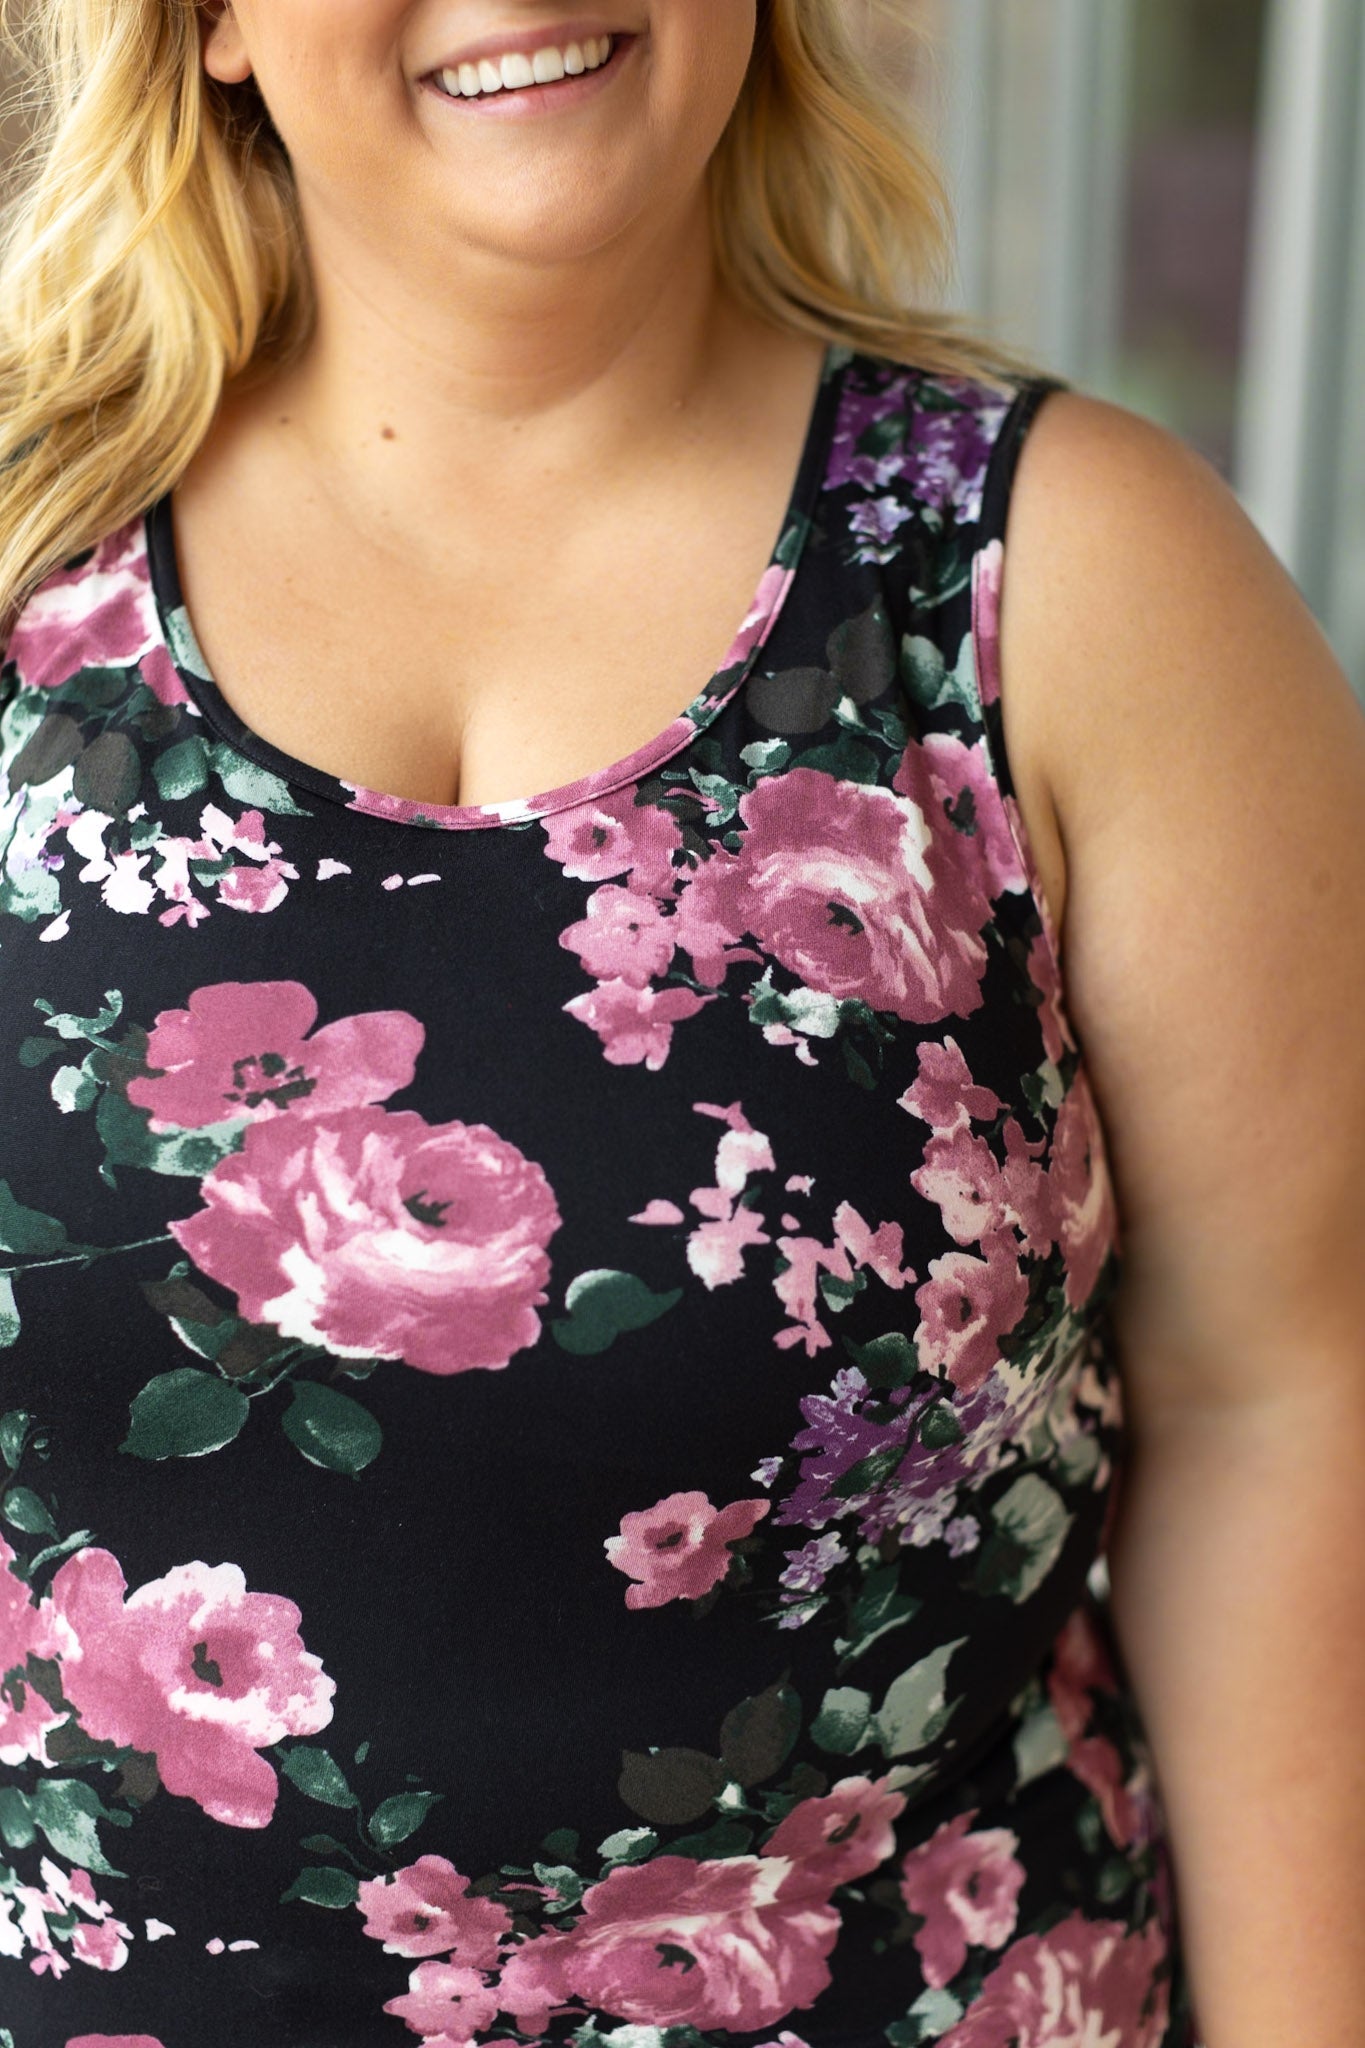 Luxe Crew Tank - Black and Mauve Floral